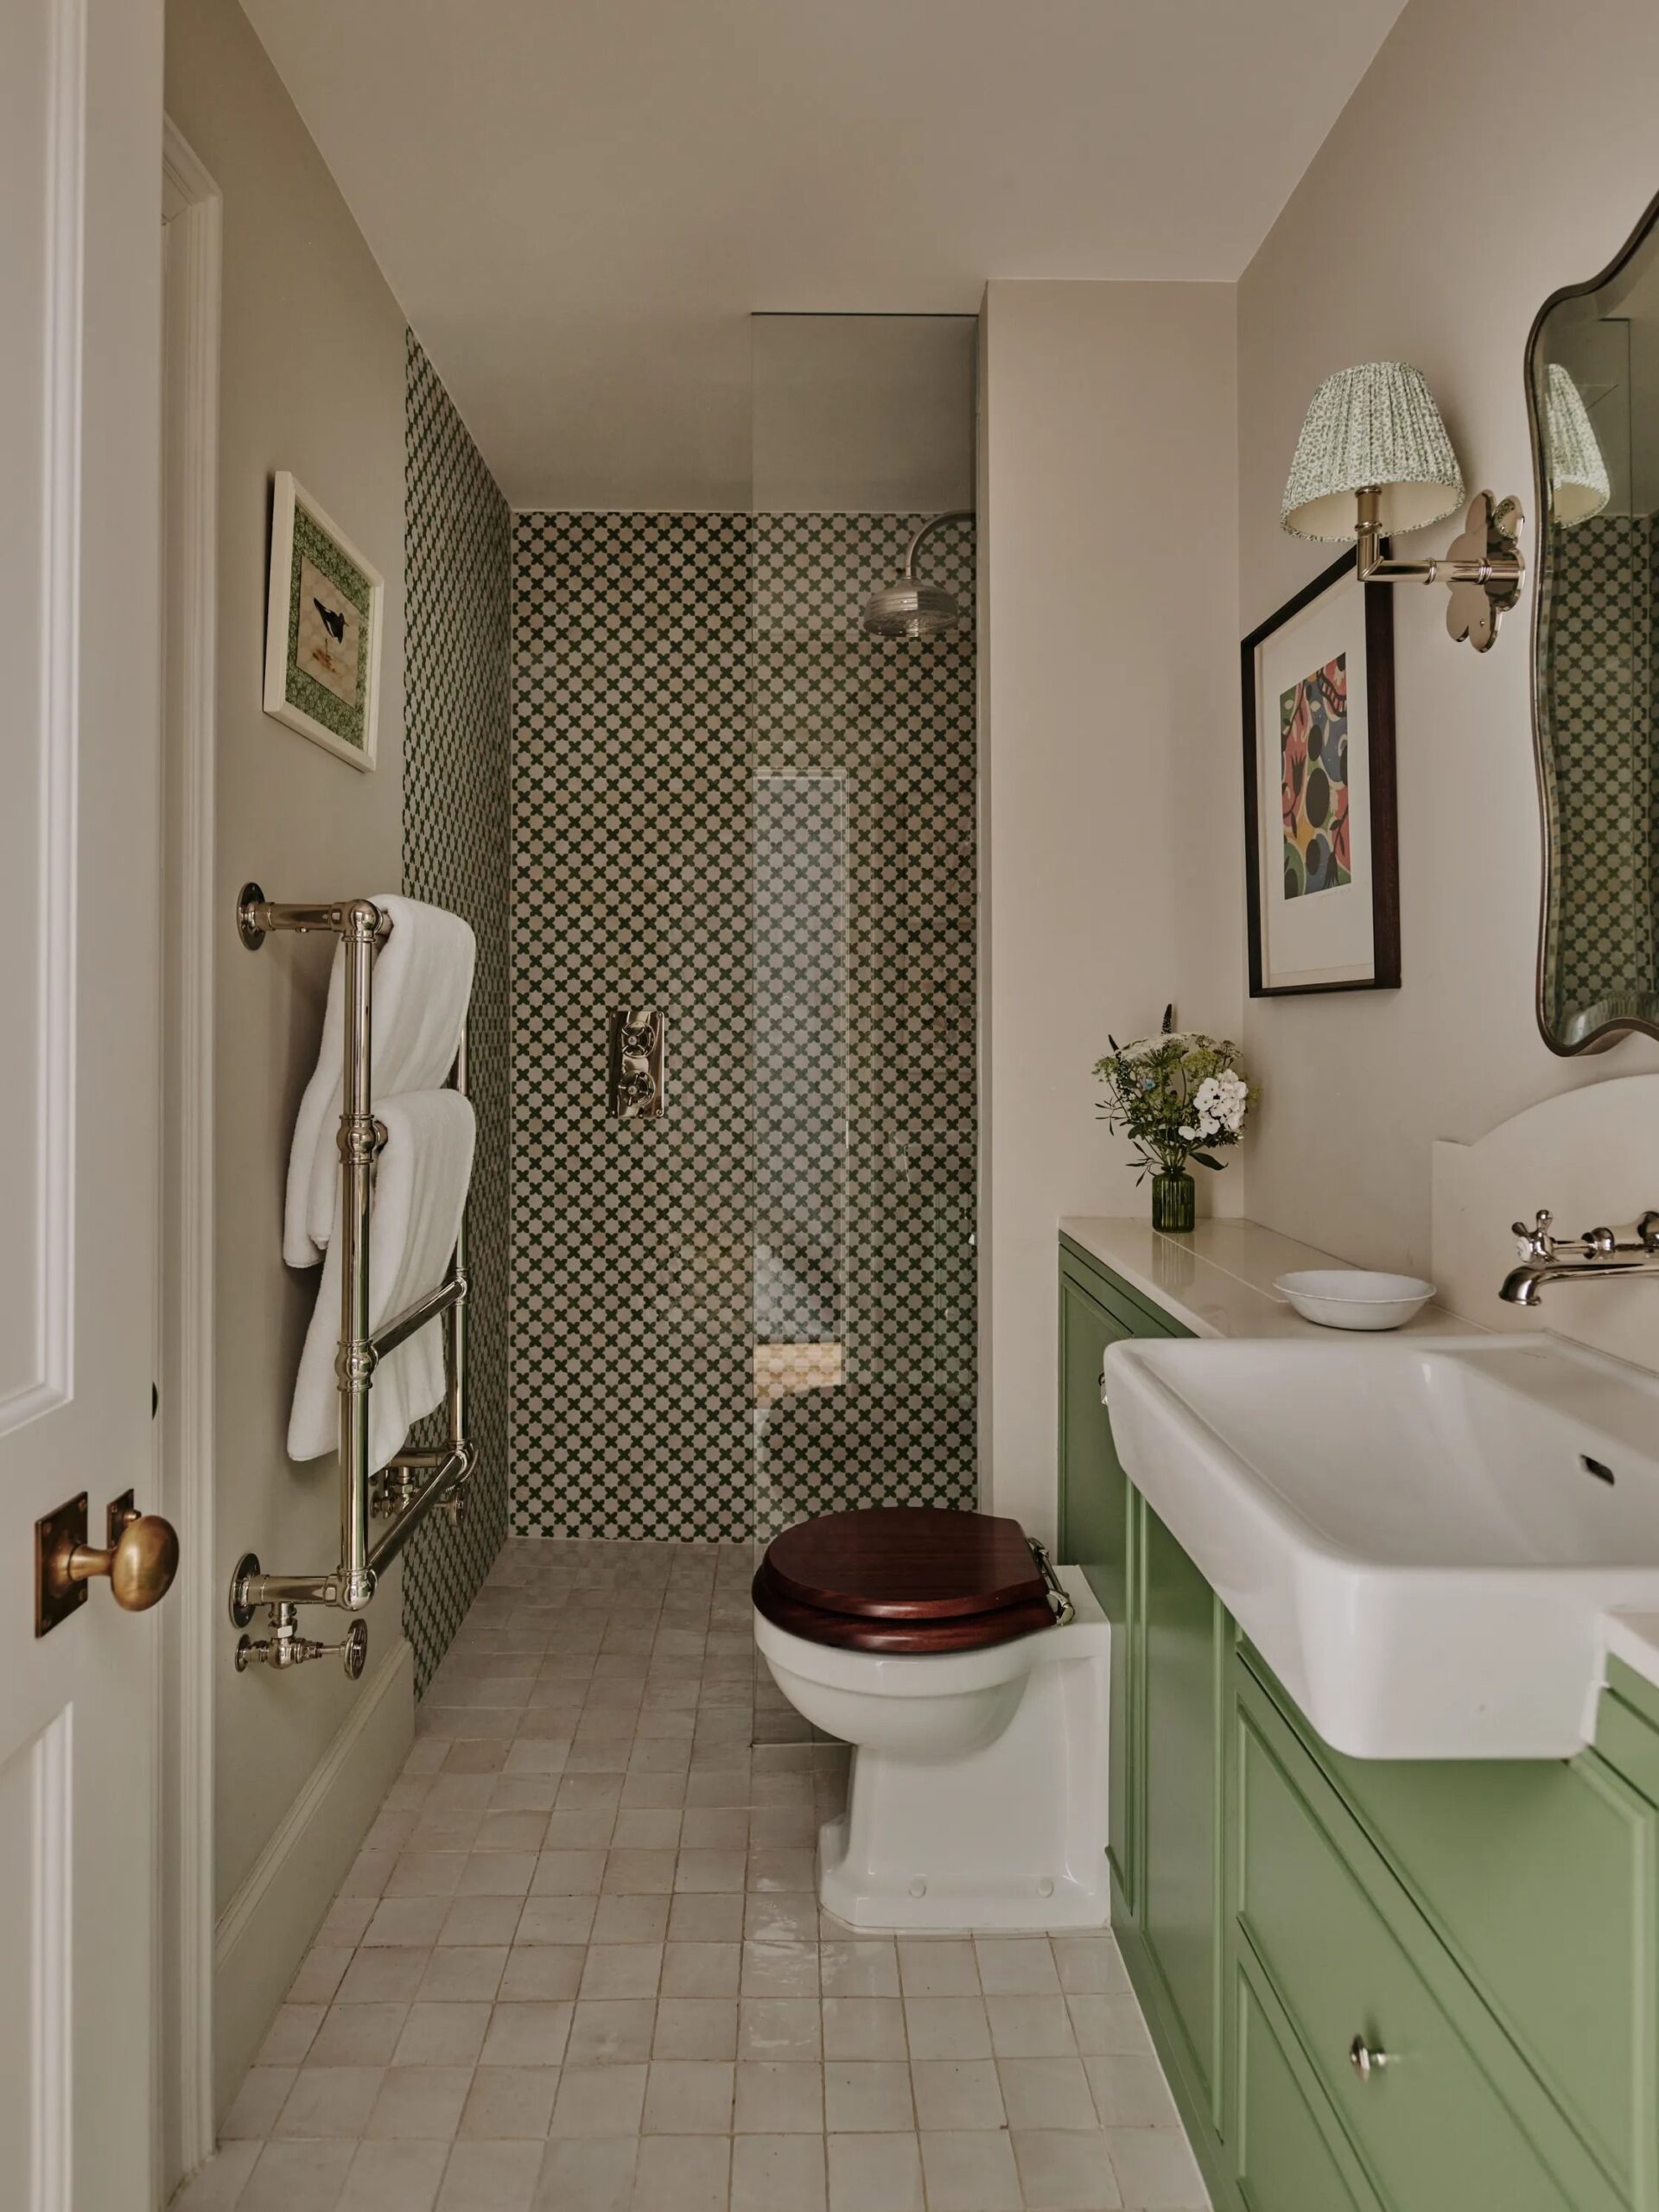 Maximizing Space: Clever Bathroom Wall Tile Ideas for Small Bathrooms